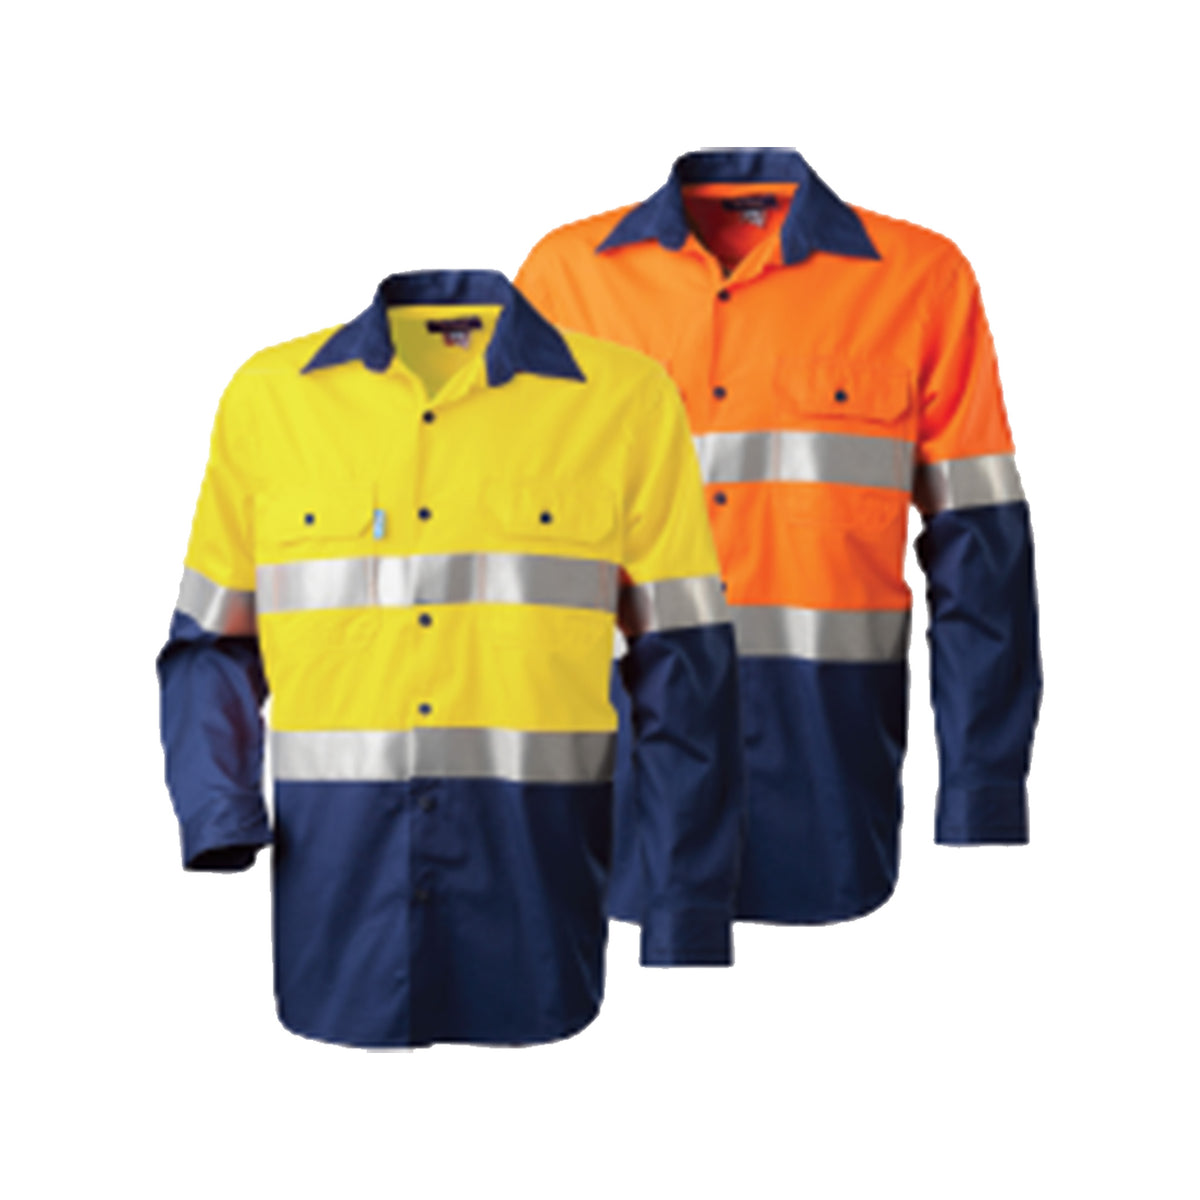 lightweight horizontally vented hi vis drill shirt with 3m tape in orange navy and yellow navy